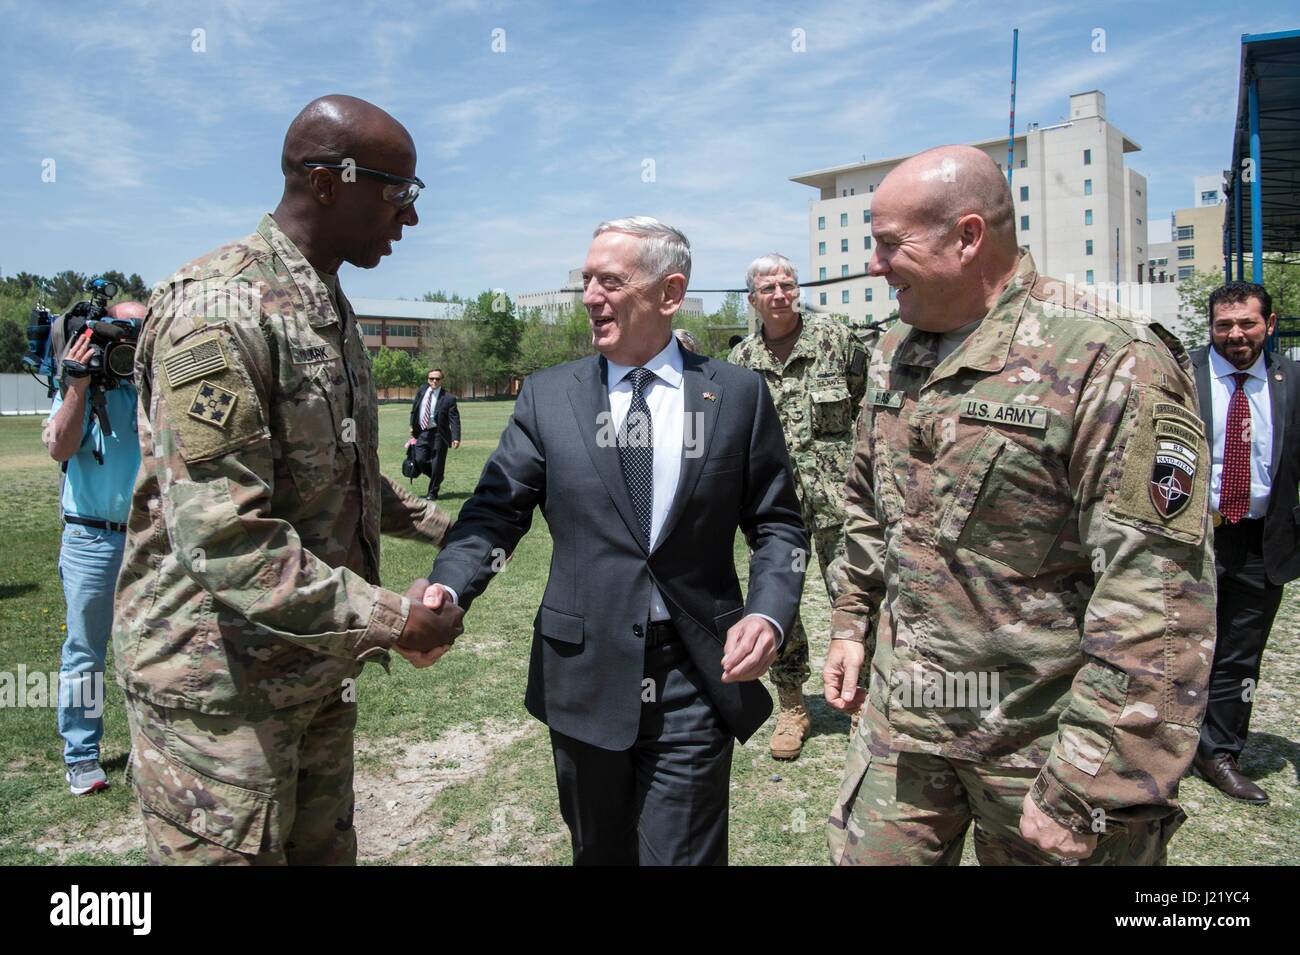 Kabul, Afghanistan. 24th April, 2017. U.S. Secretary of Defense James Mattis is greeted at Resolute Support Headquarters by U.S. Army Command Sgt. Maj David Clark, left, and U.S. Army Maj. Gen. Christopher Haas April 24, 2017 in Kabul, Afghanistan. Credit: Planetpix/Alamy Live News Stock Photo